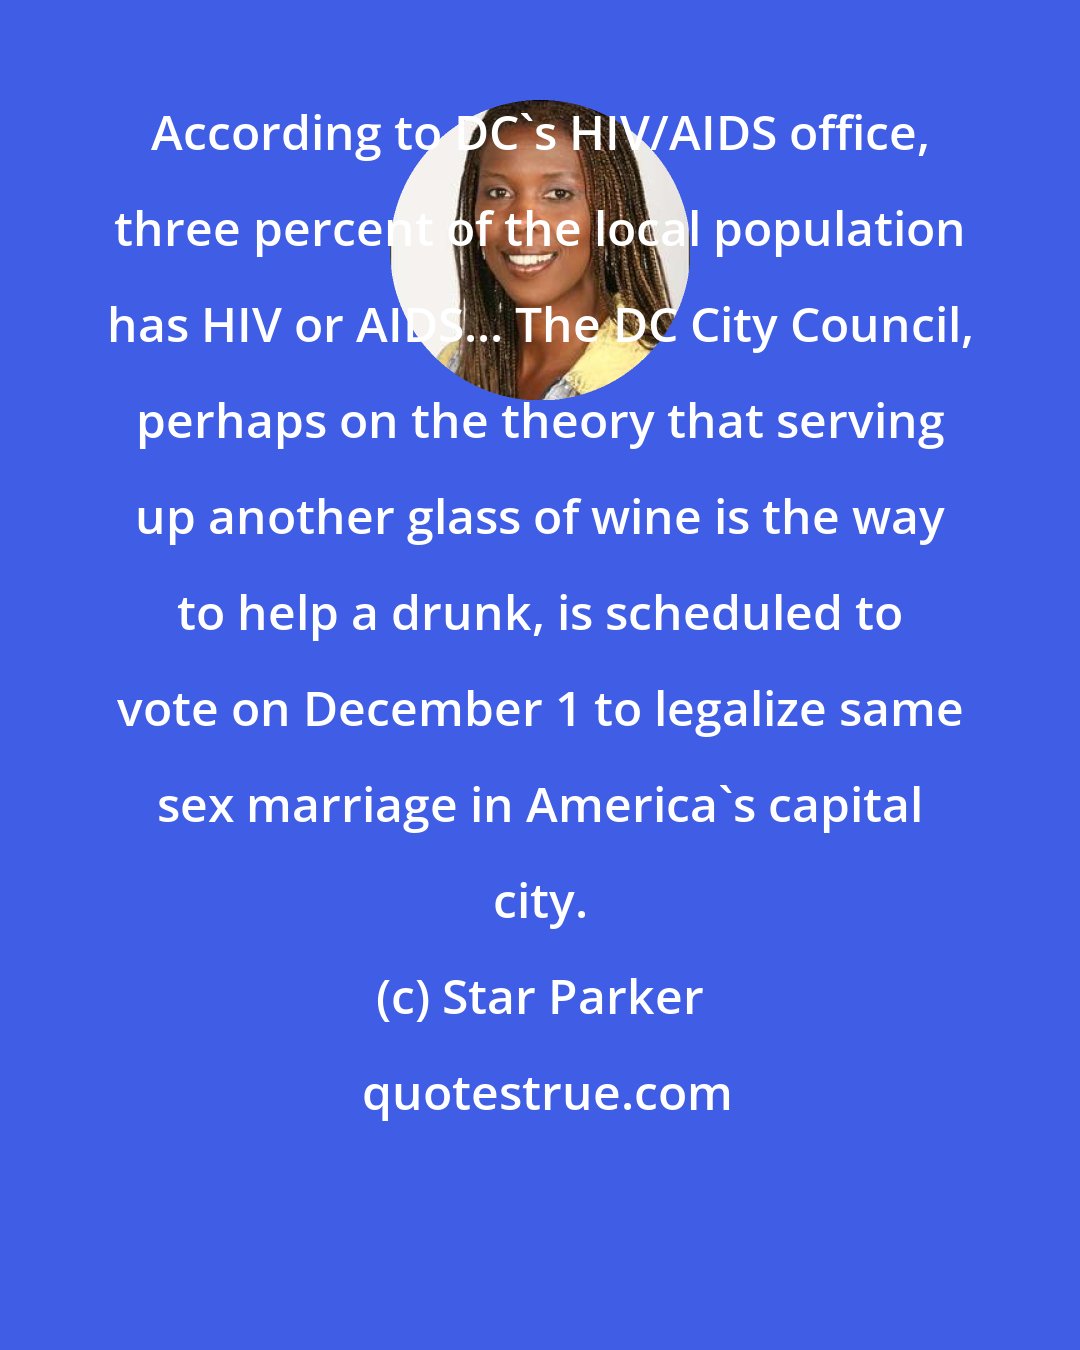 Star Parker: According to DC's HIV/AIDS office, three percent of the local population has HIV or AIDS... The DC City Council, perhaps on the theory that serving up another glass of wine is the way to help a drunk, is scheduled to vote on December 1 to legalize same sex marriage in America's capital city.